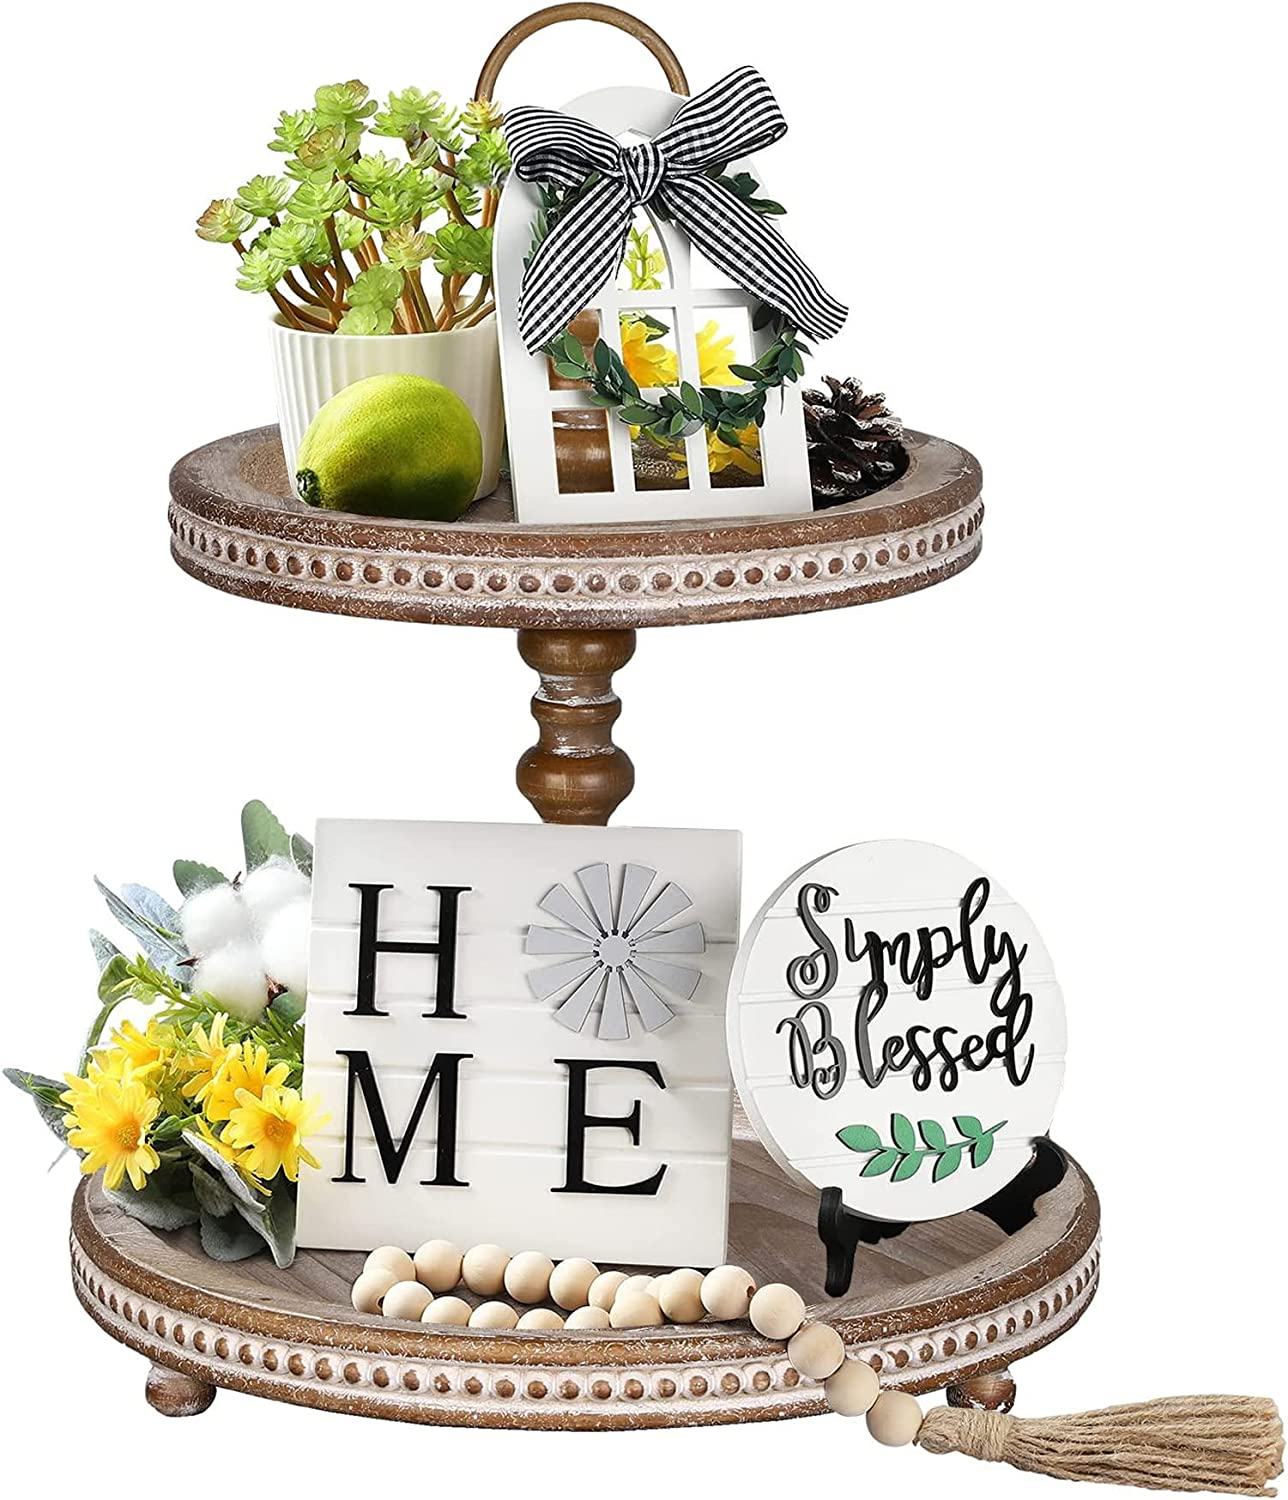 Amazon.com: LIBWYS 6 Pcs Farmhouse Decors for Tiered Tray: 40% off after code N4IBXNUS $8.39